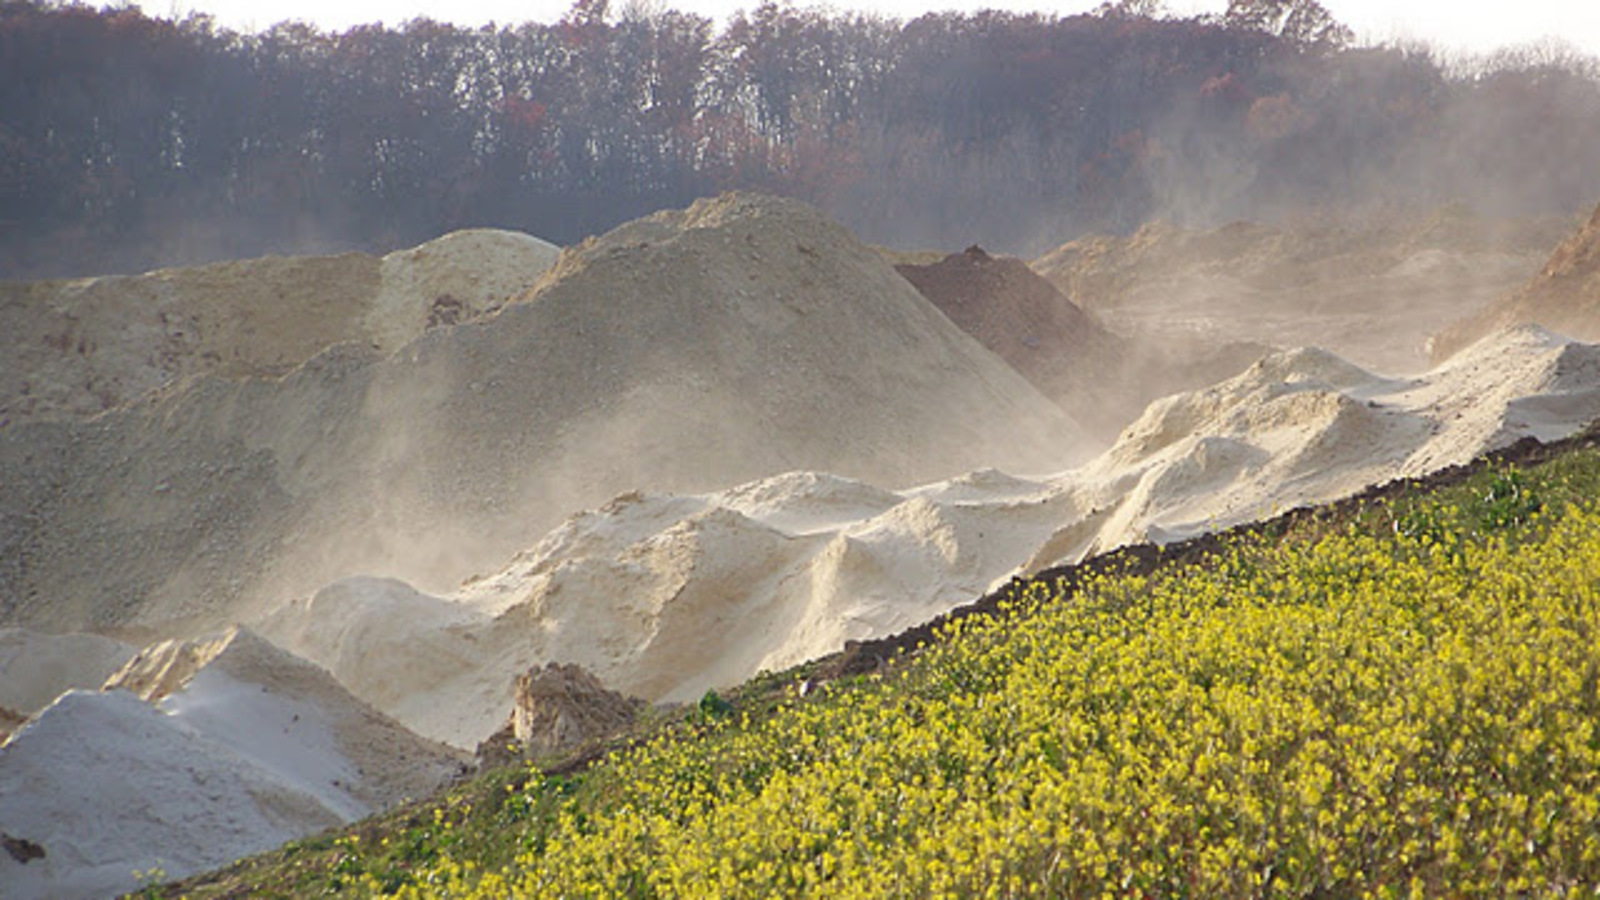 Sand blowing off of Silica Sand pile in Bloomer, WI